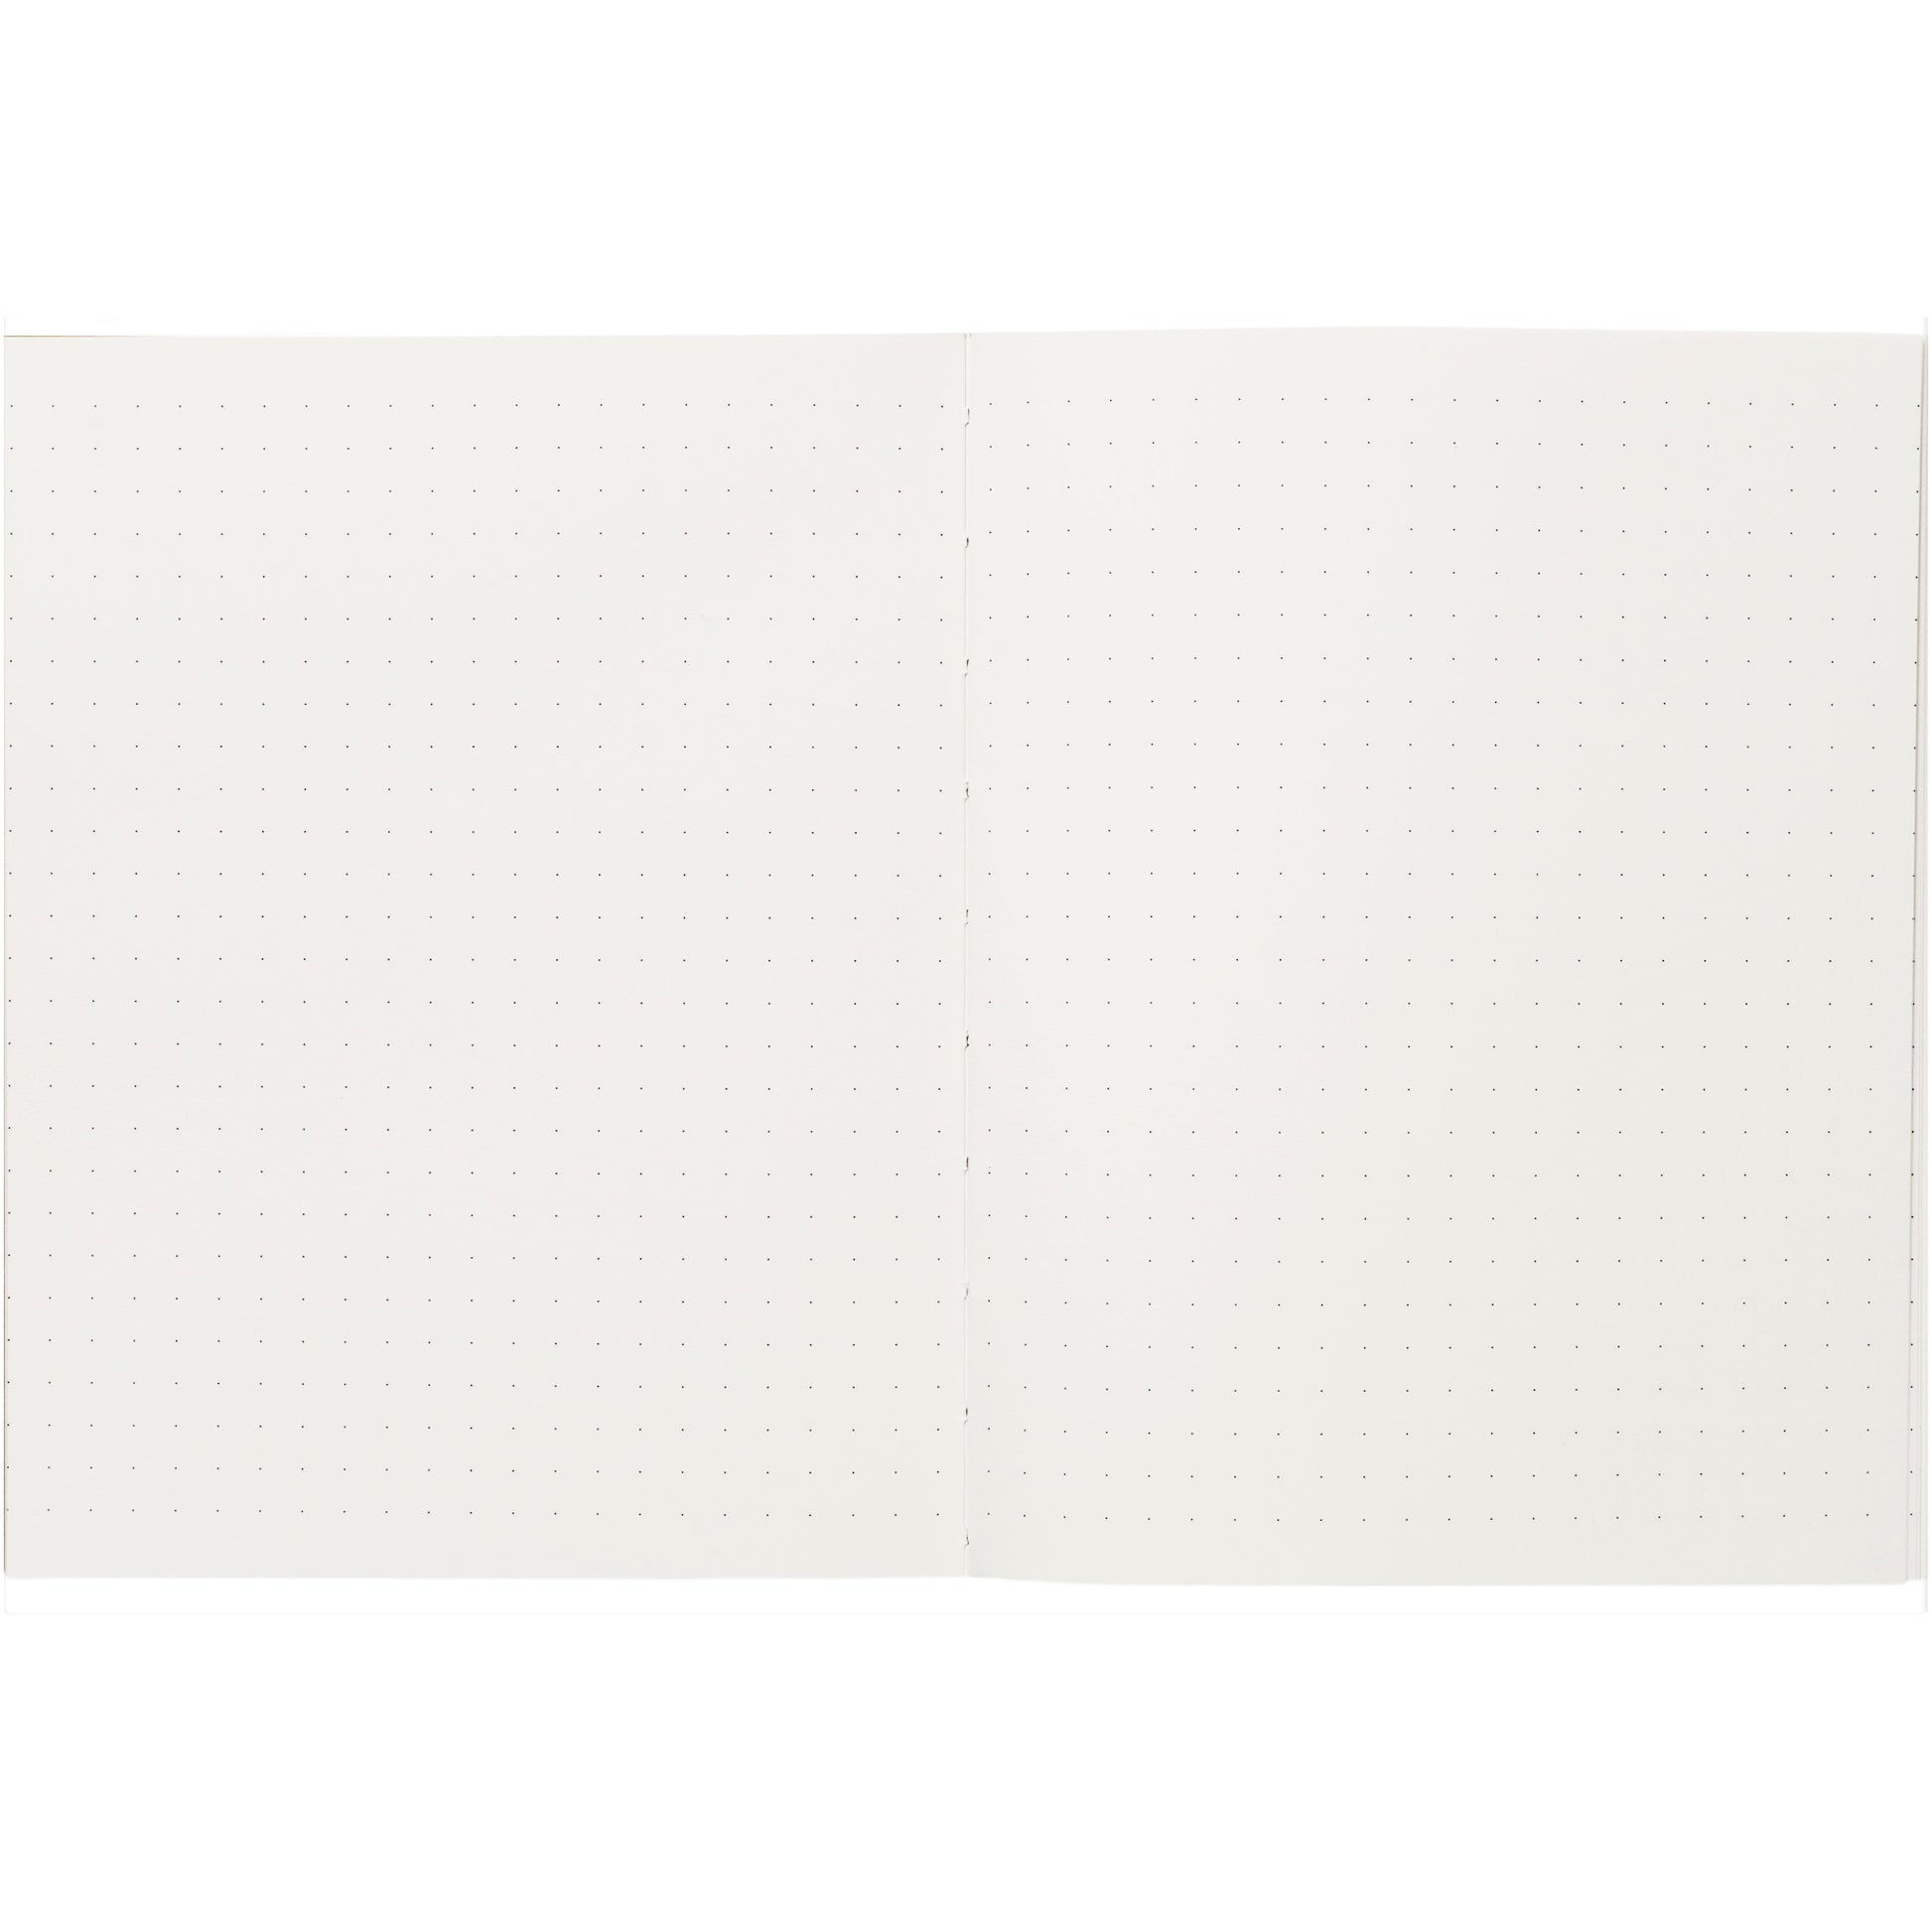 Layflat notebook with dark blue softcover with red grid lines, inner dotted pages pictured